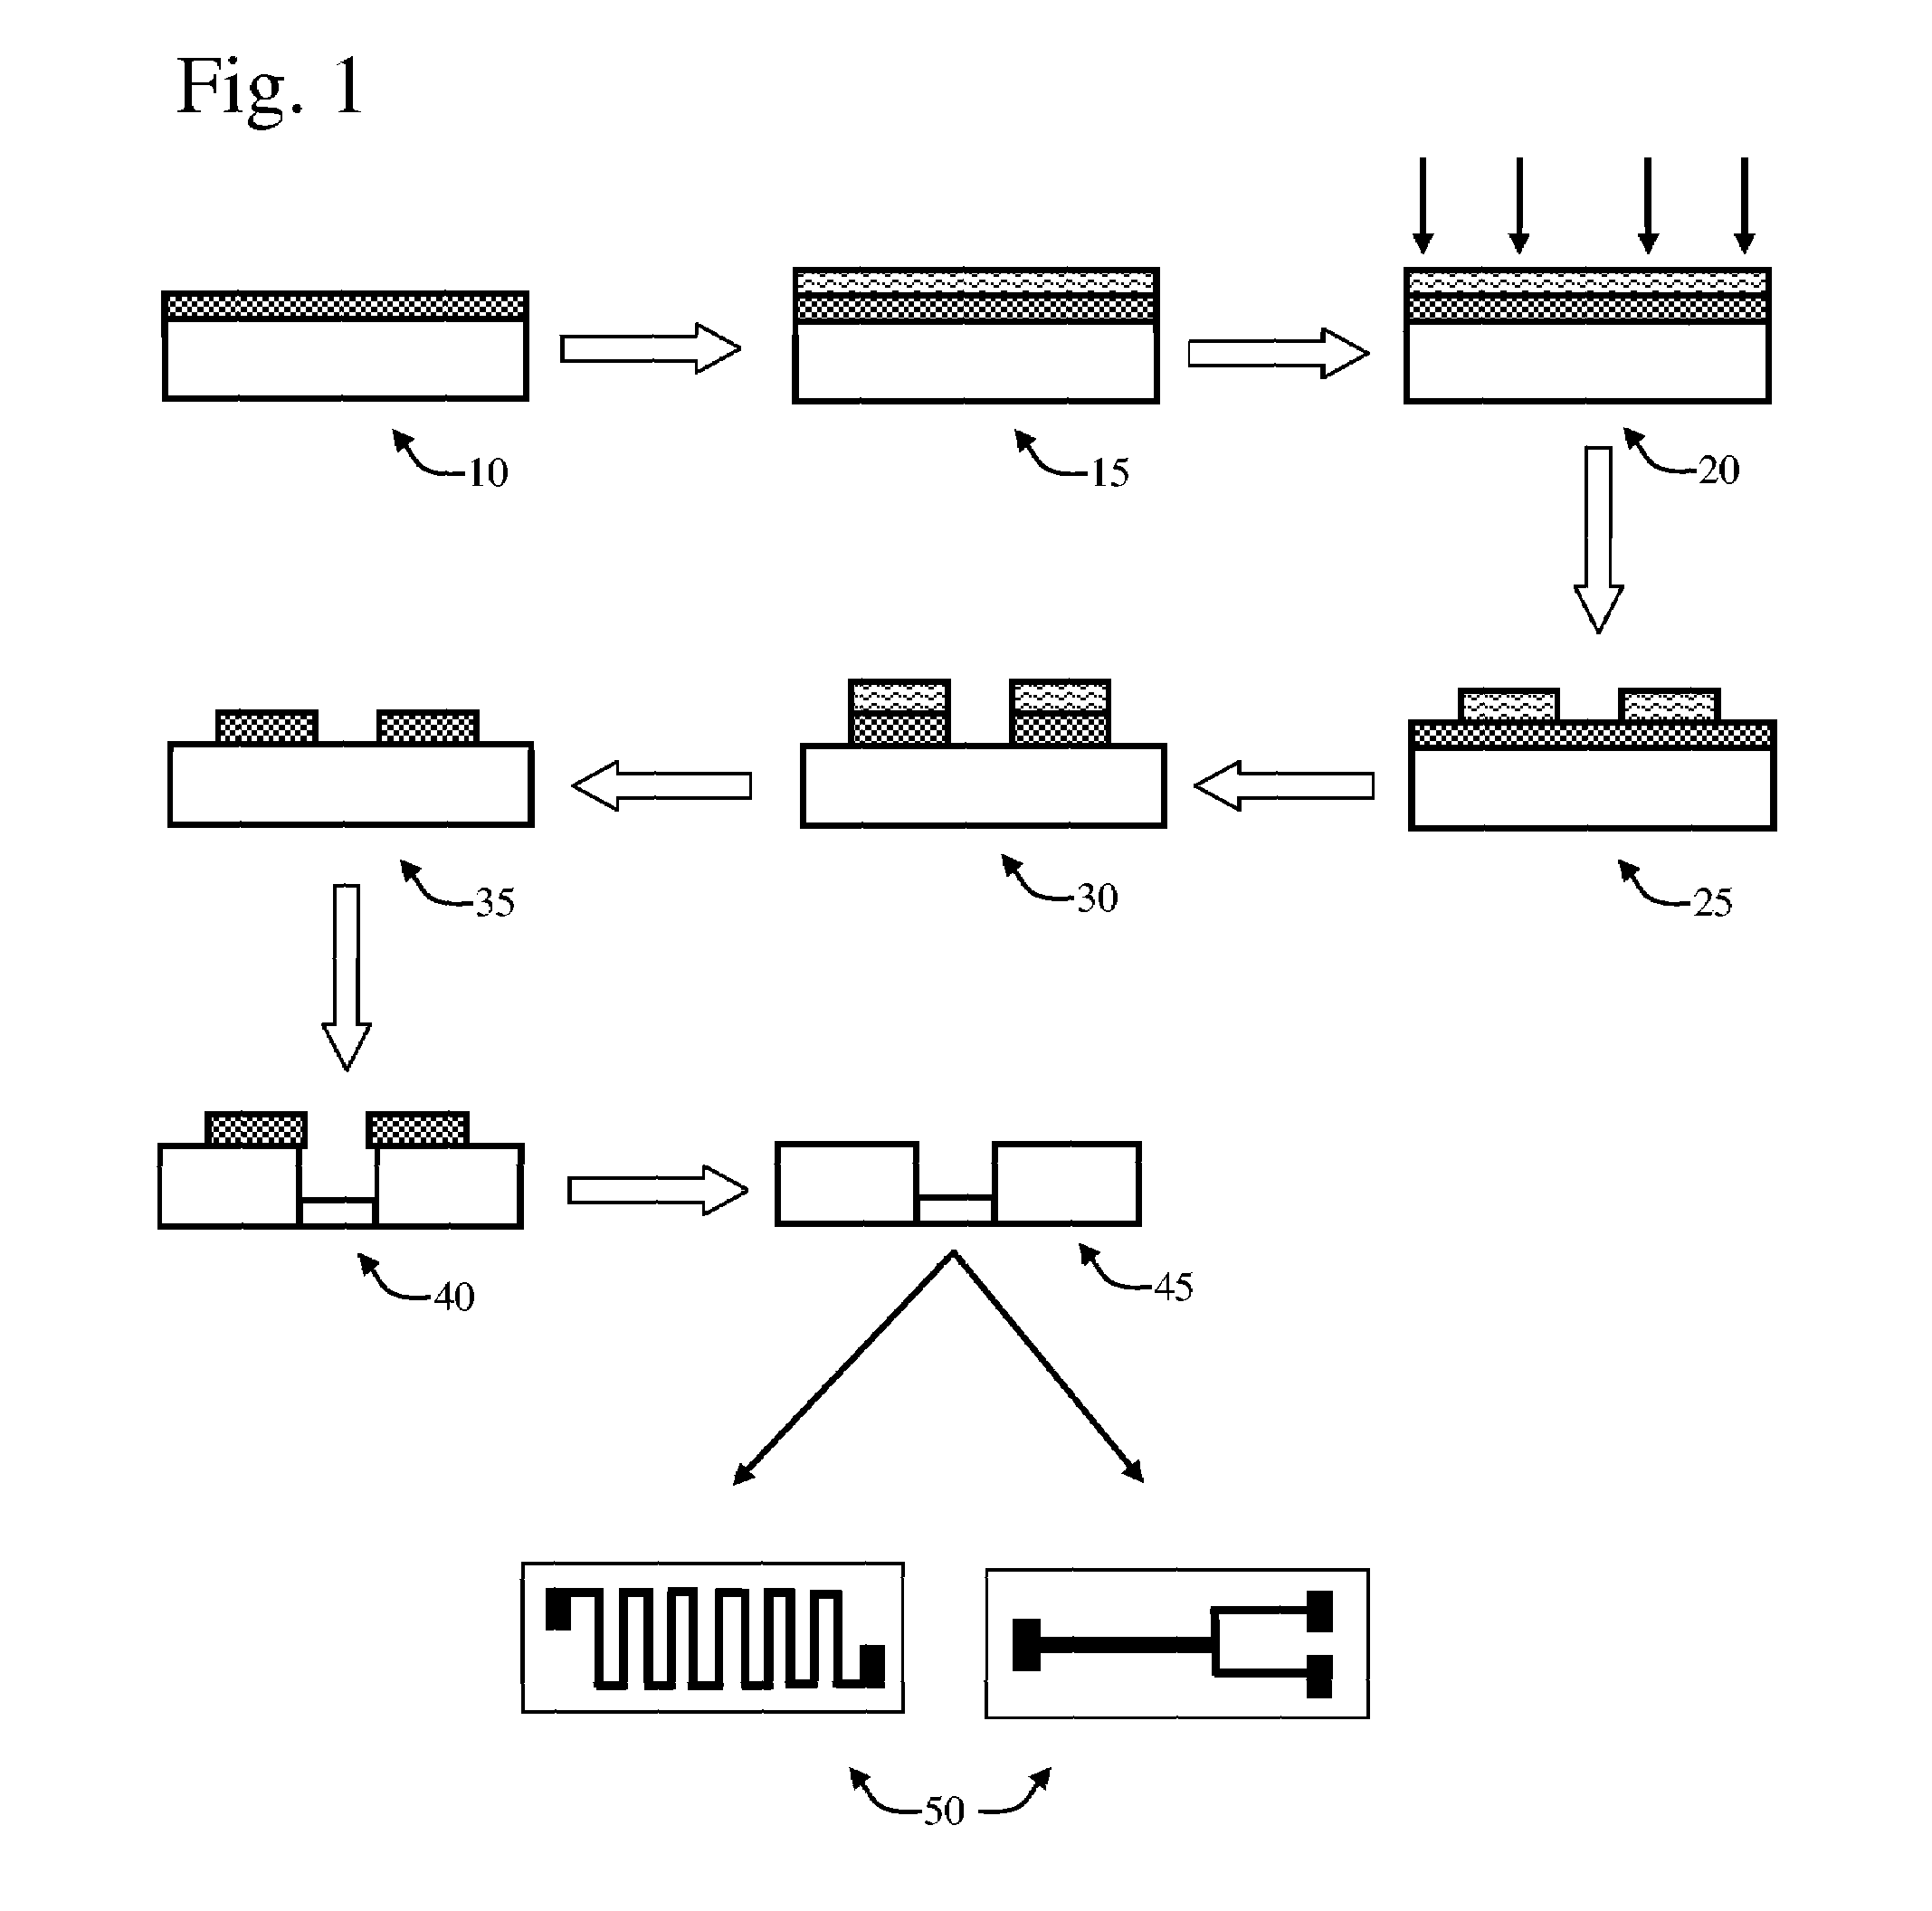 Method for etching microchannel networks within liquid crystal polymer substrates